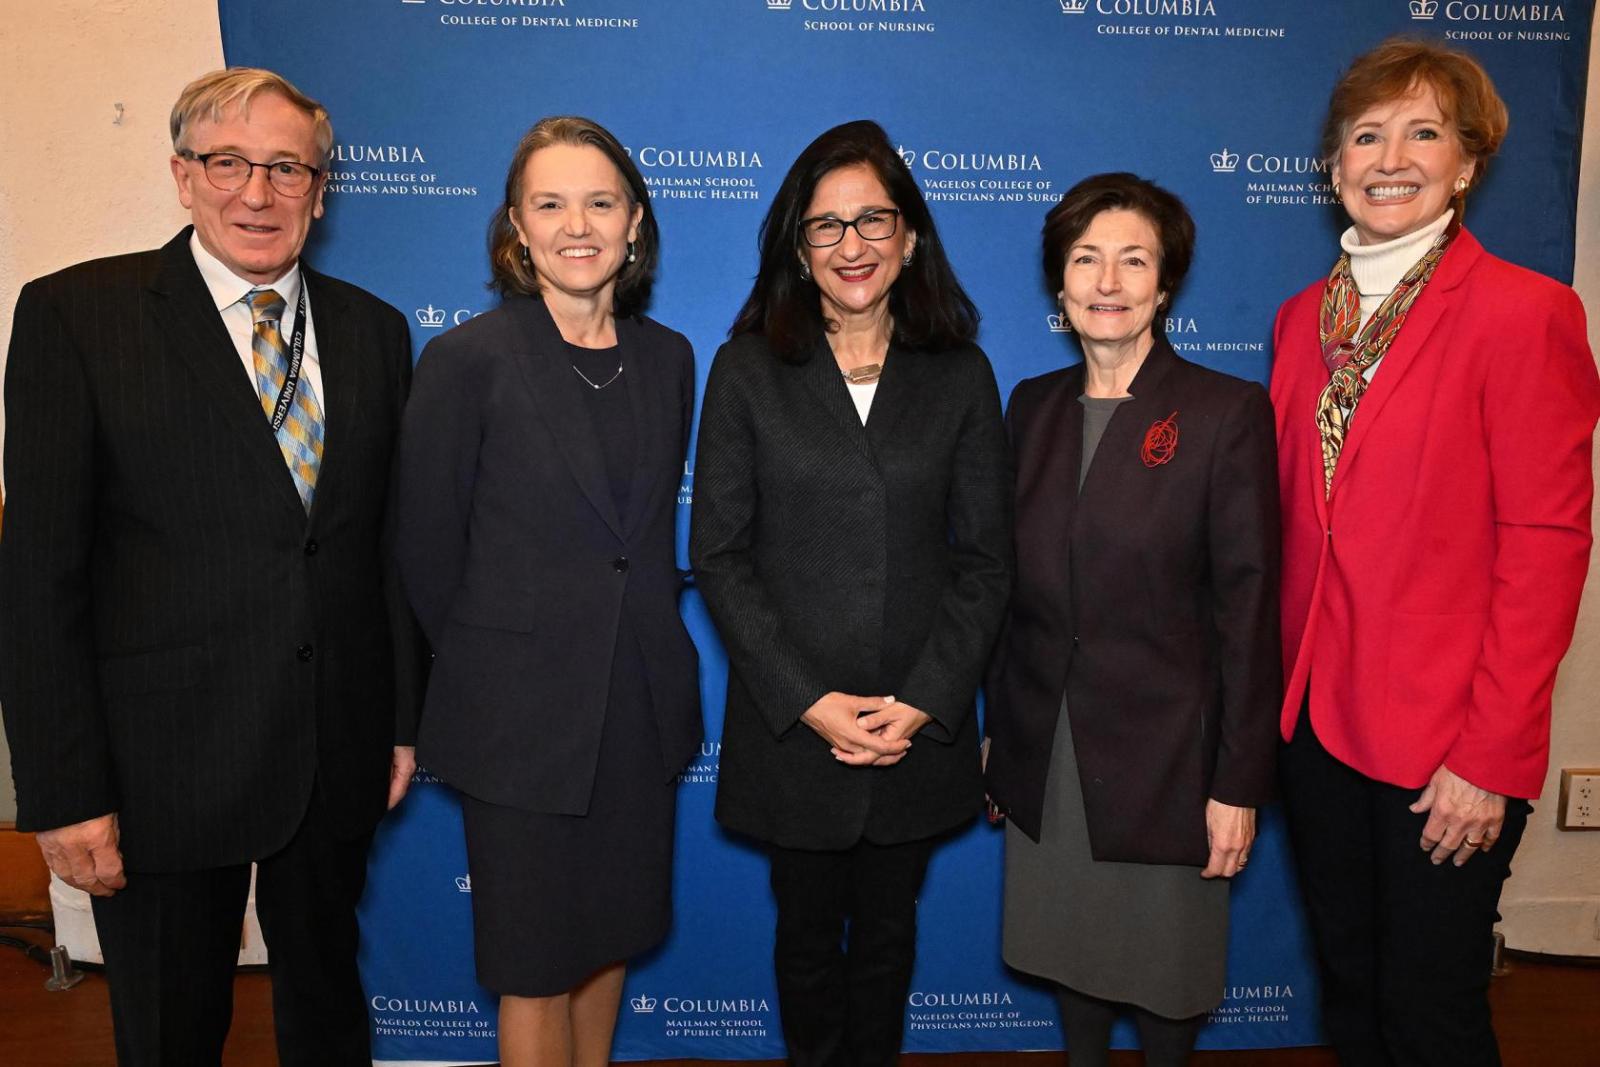 Minouche Shafik with CUIMC deans, from left, Christian S. Stohler (College of Dental Medicine), Katrina Armstrong (VP&S), Linda P. Fried (Mailman), and Lorraine Frazier (School of Nursing).